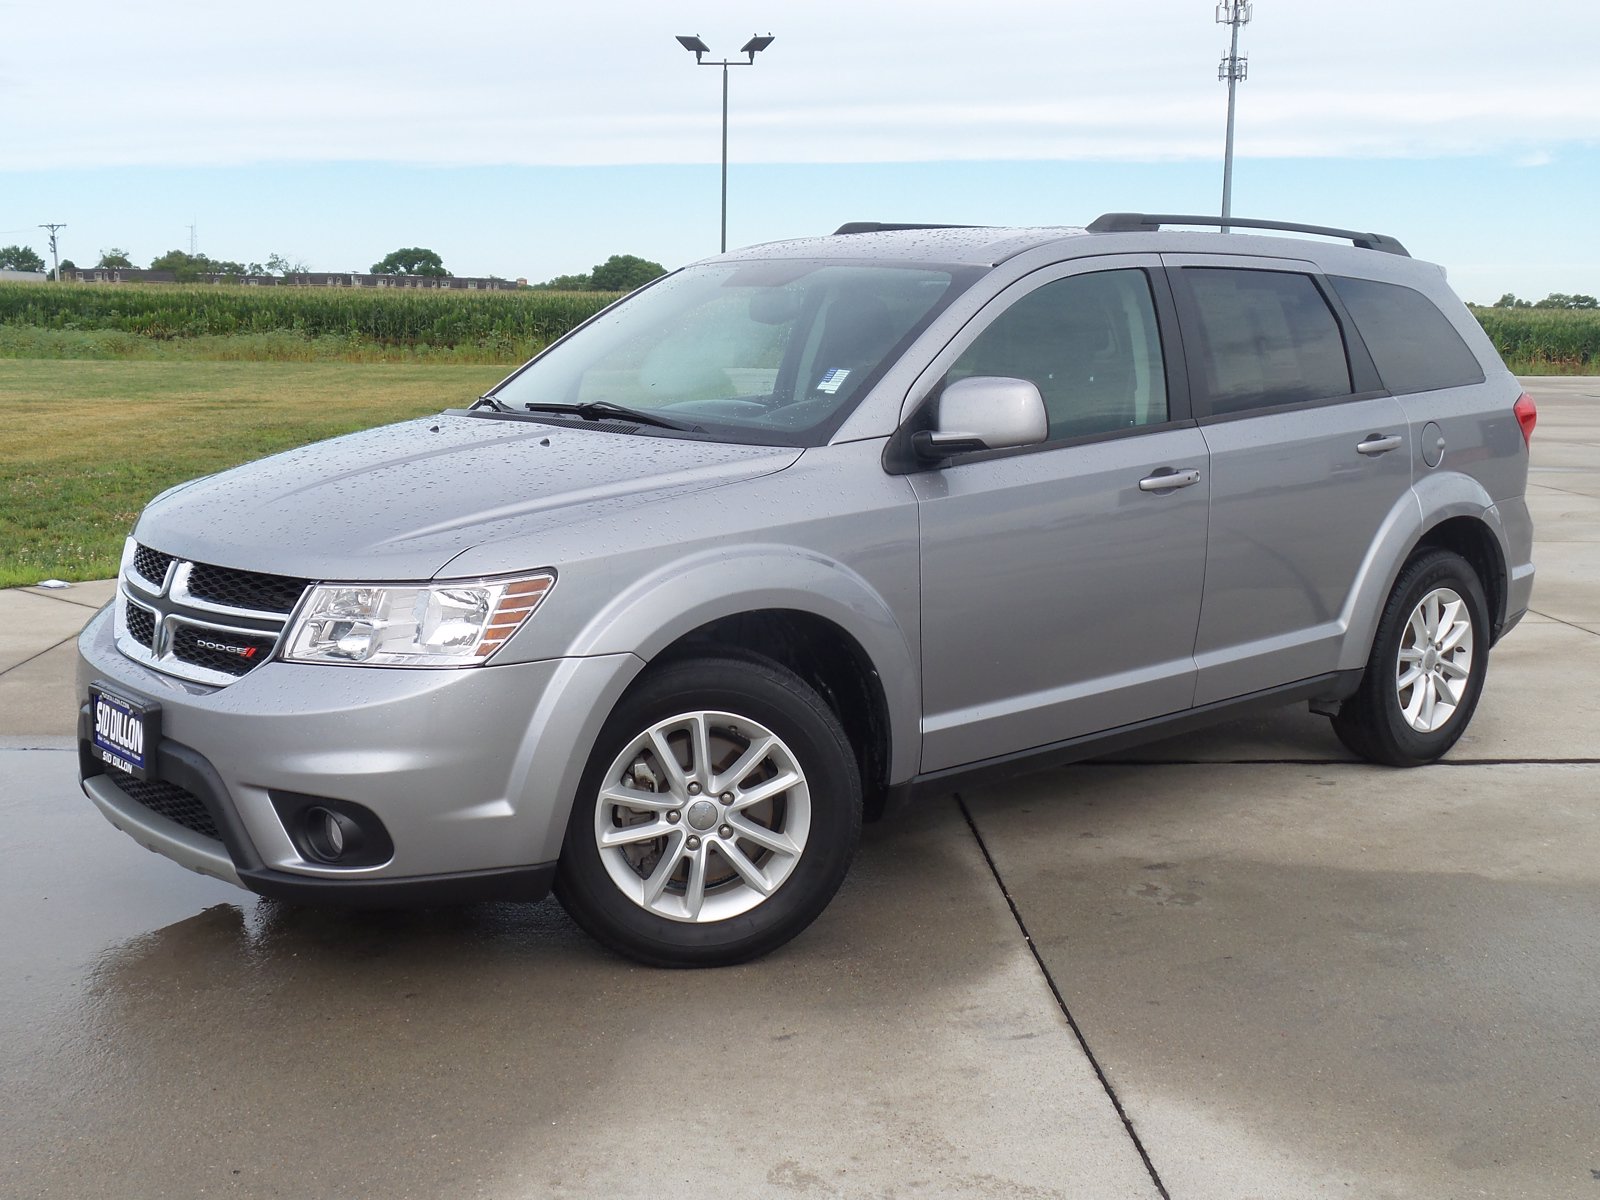 Pre-Owned 2016 Dodge Journey SXT FWD SUV